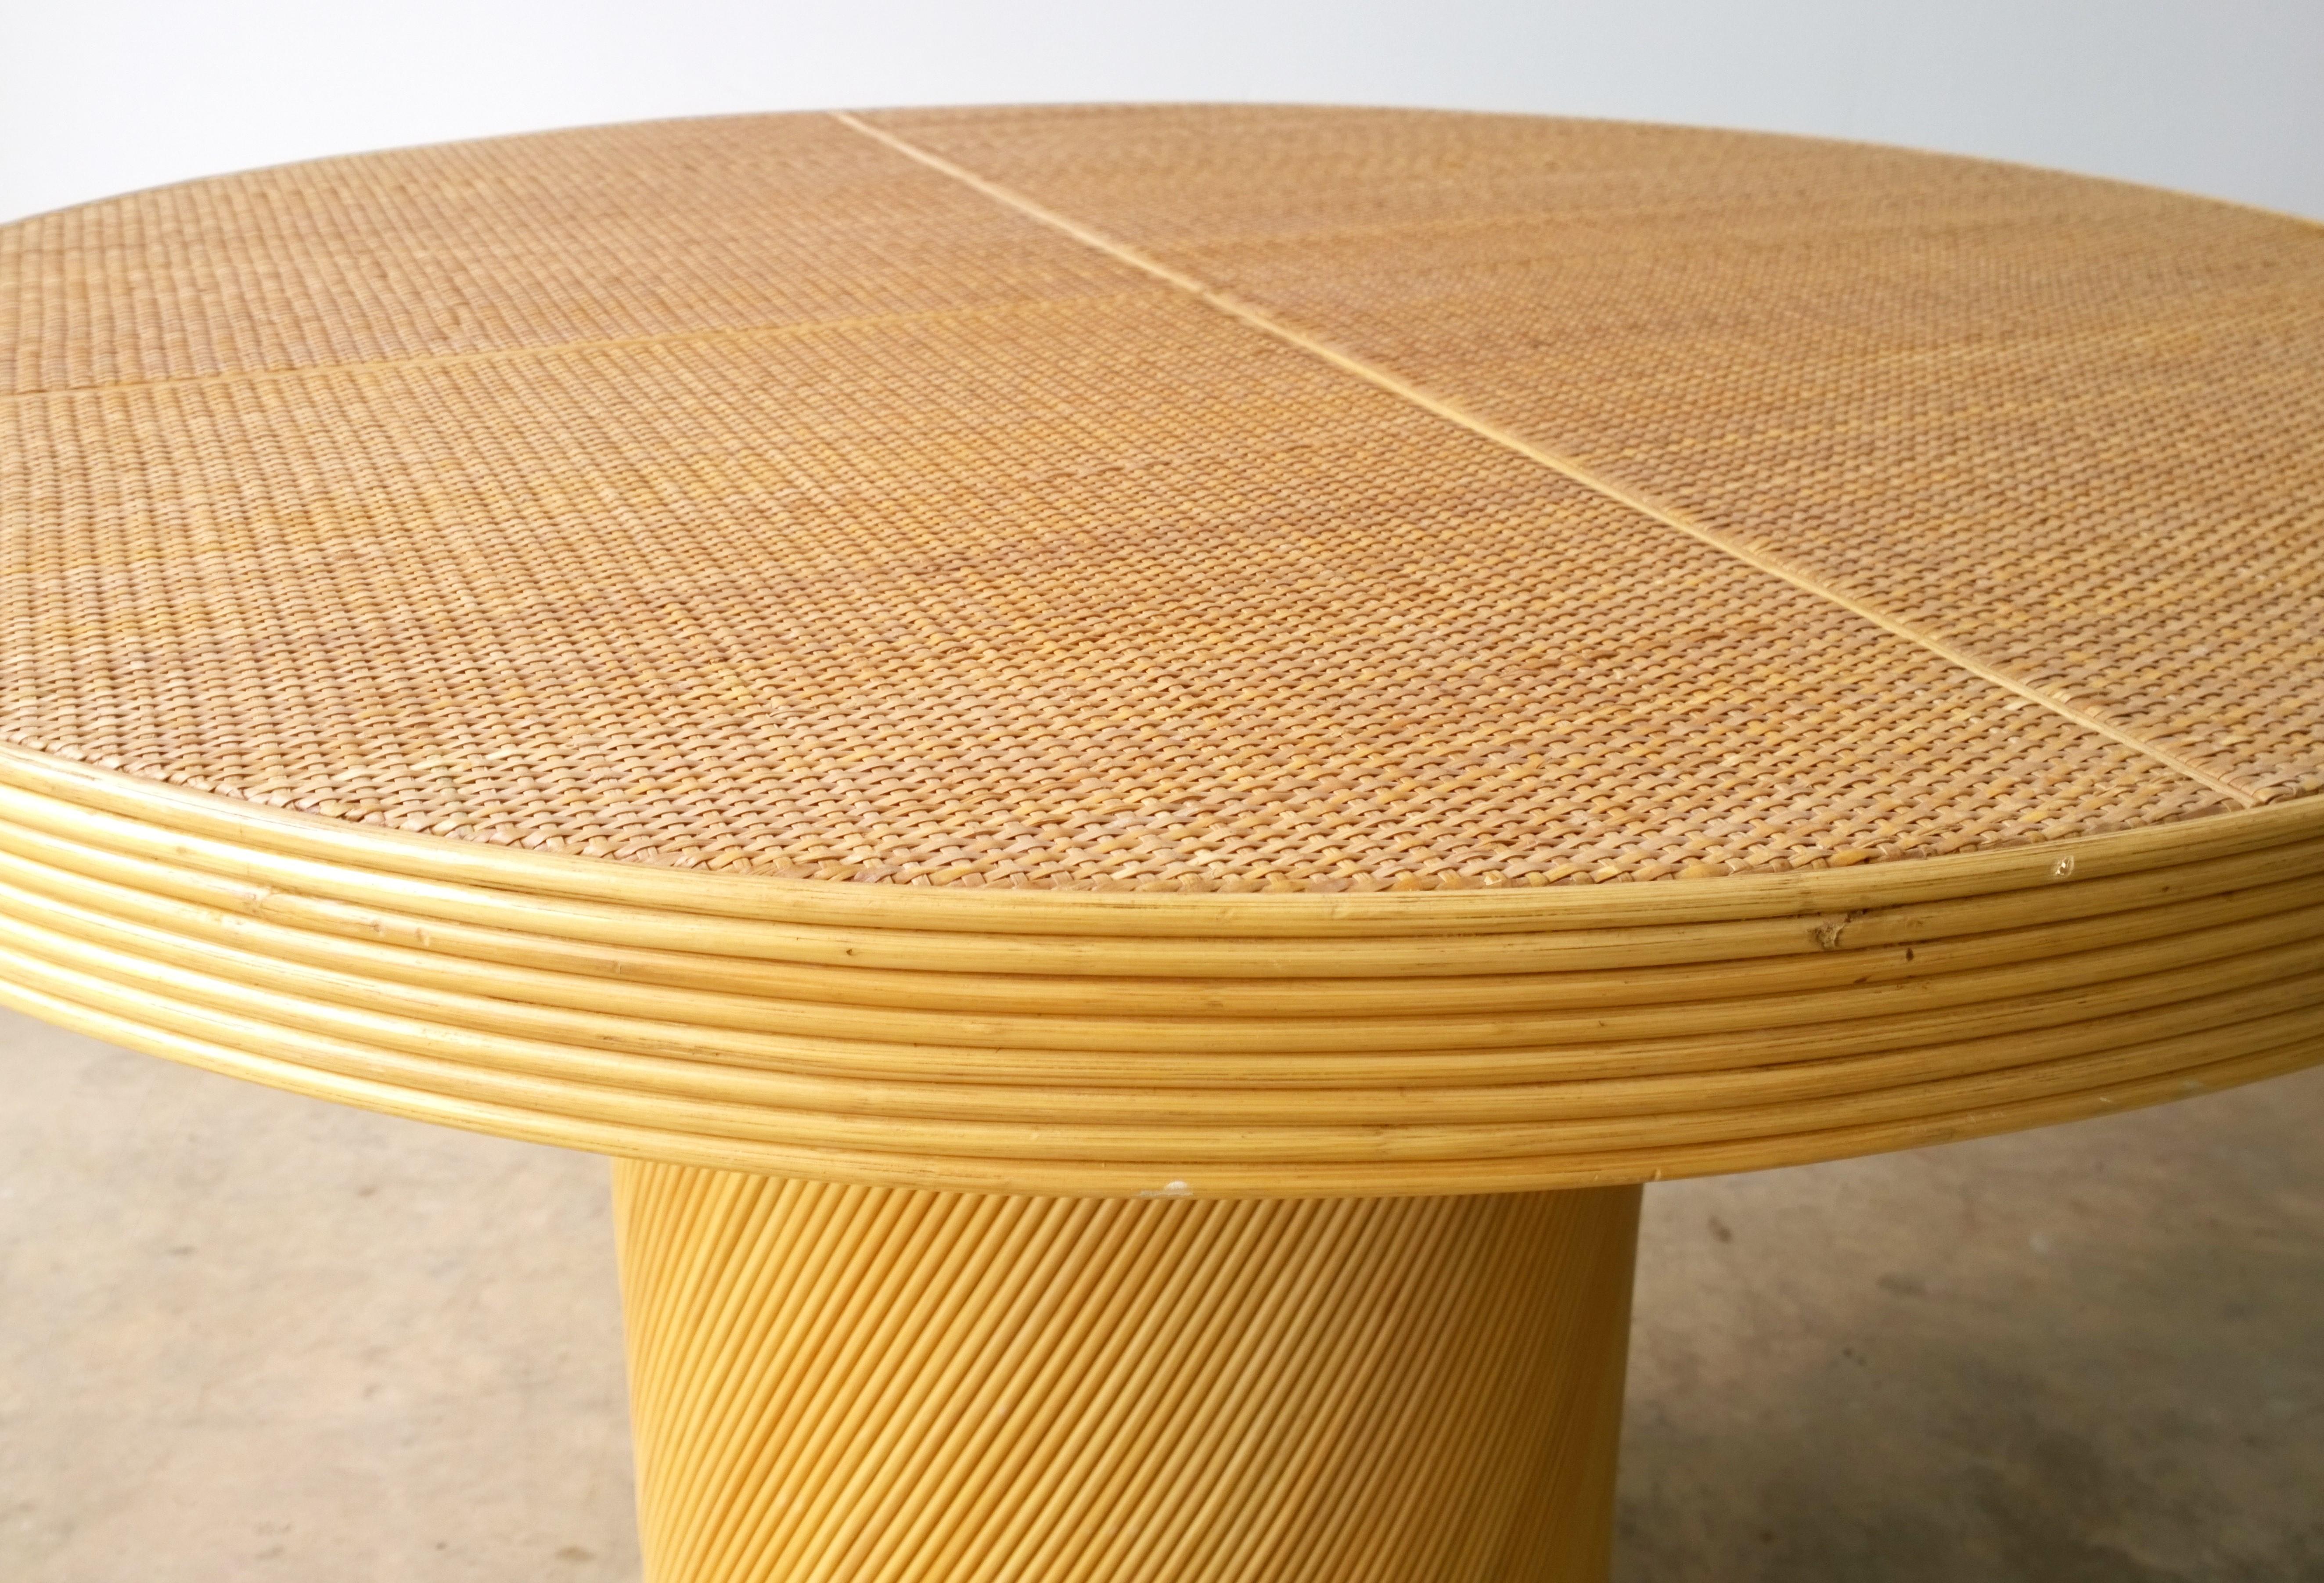 Rattan Cane & Wicker Circular Pedestal Center Table/Dining Table with Brass Base 2